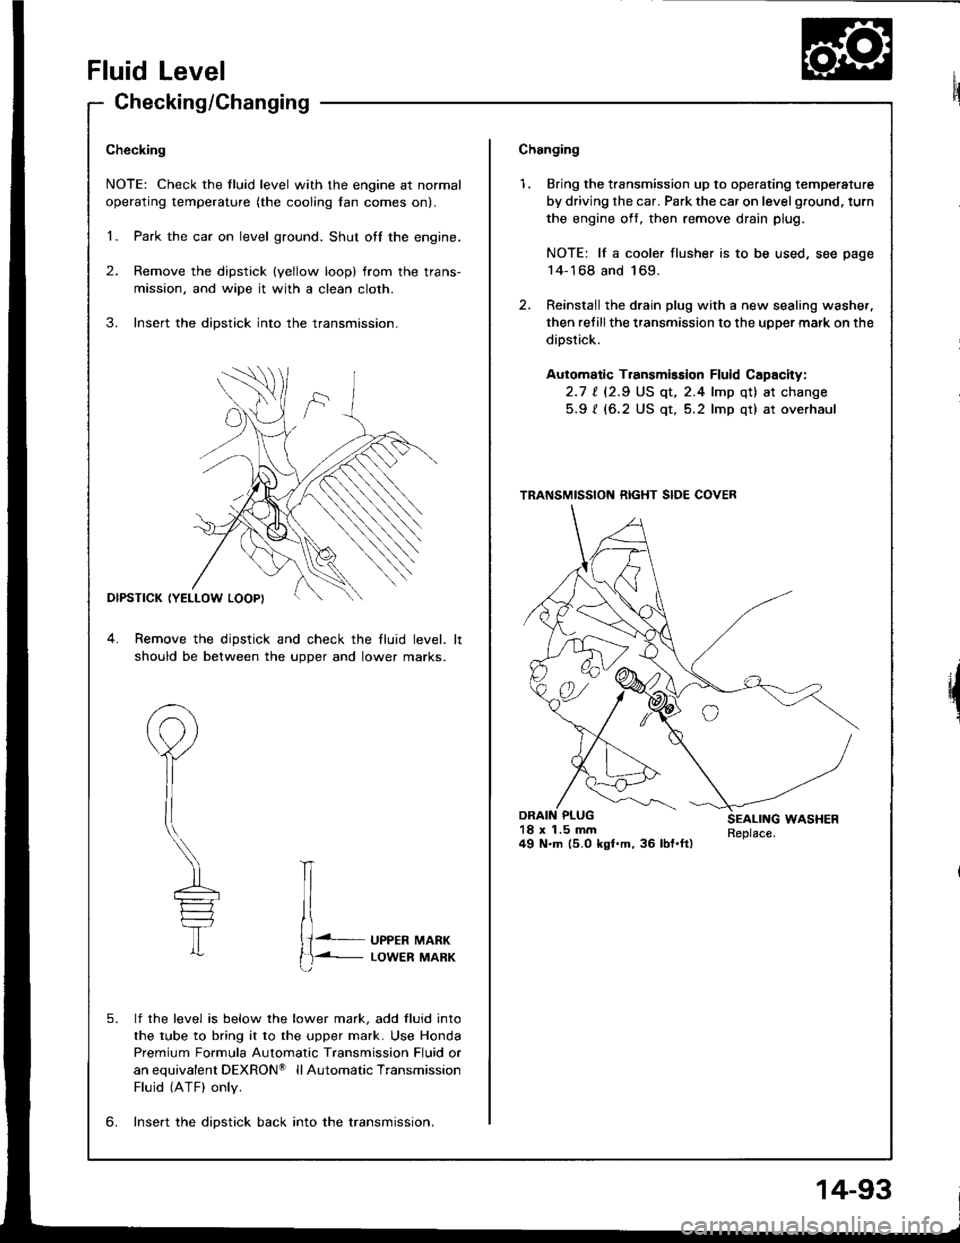 HONDA INTEGRA 1994 4.G Workshop Manual Fluid Level
Checking/Changing
Checking
NOTE: Check the fluid level with the engine at normal
operating temperature (the cooling lan comes on).
1. Park the car on level ground. Shut otf the engine.
2. 